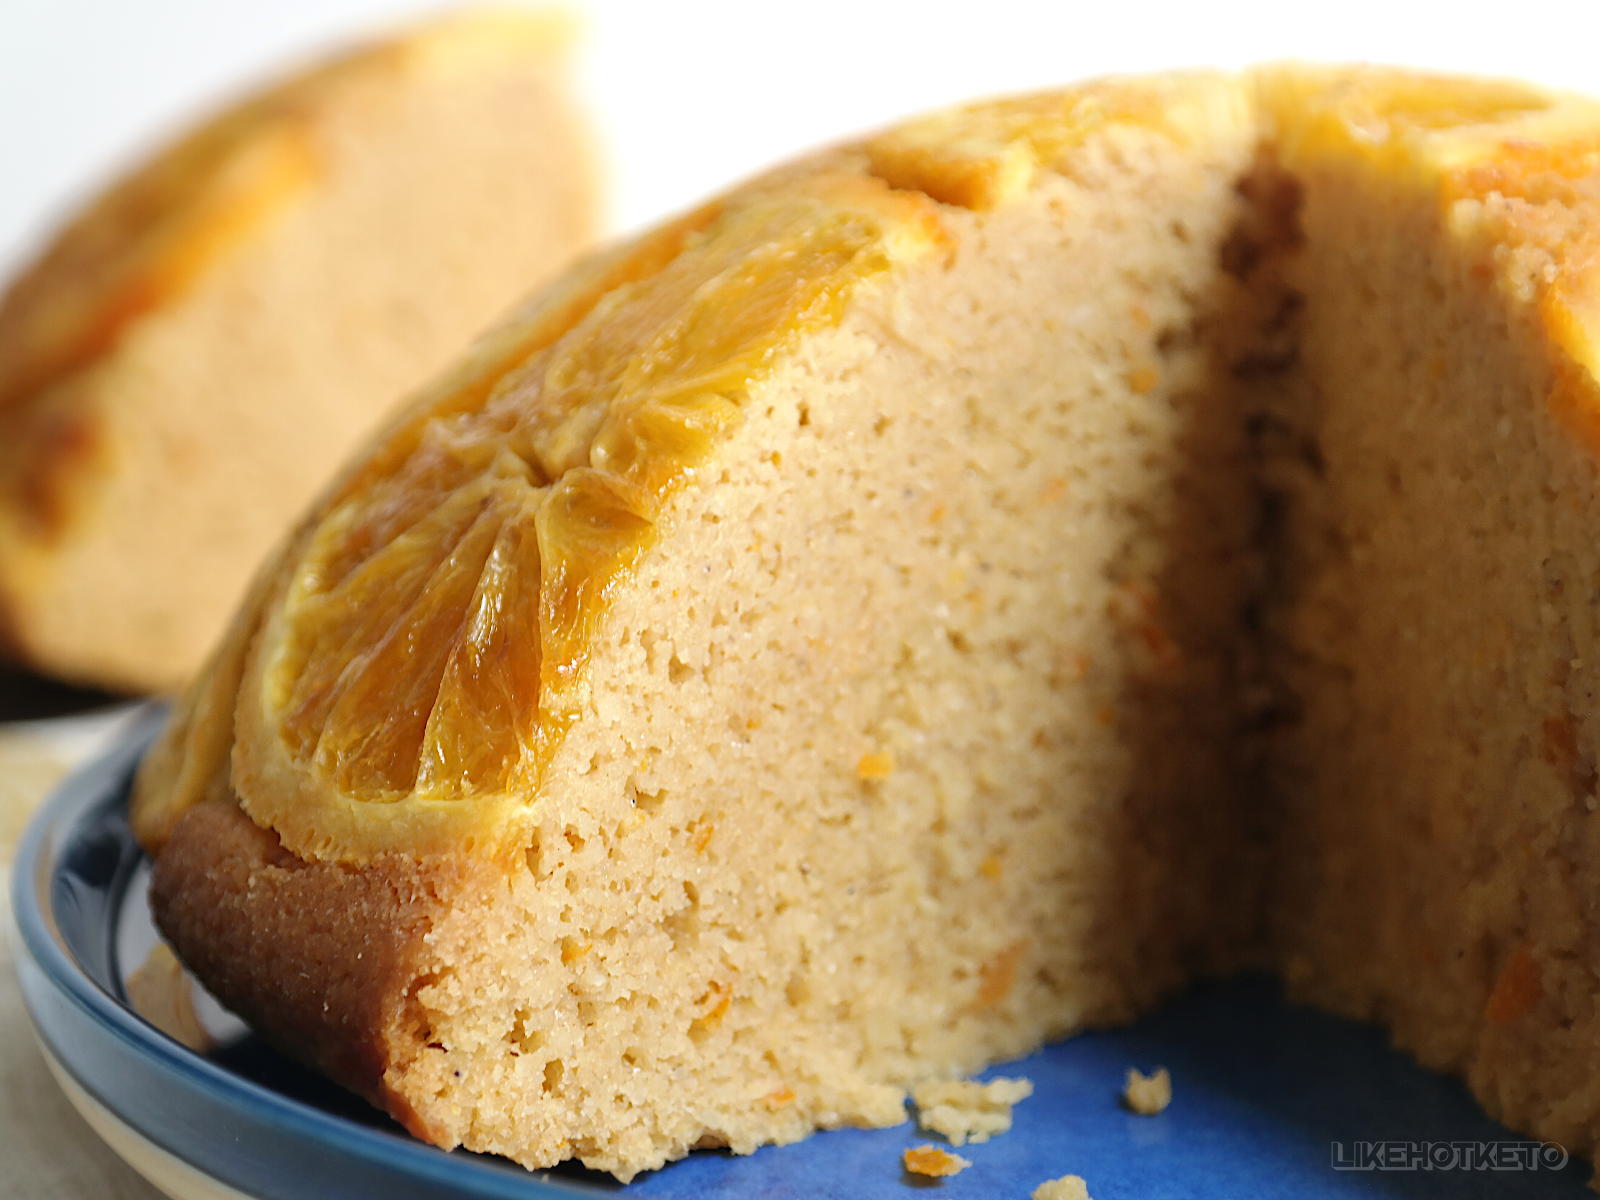 A sliced olive oil and orange sugar-free cake, showing its tender, fluffy cake crumb.